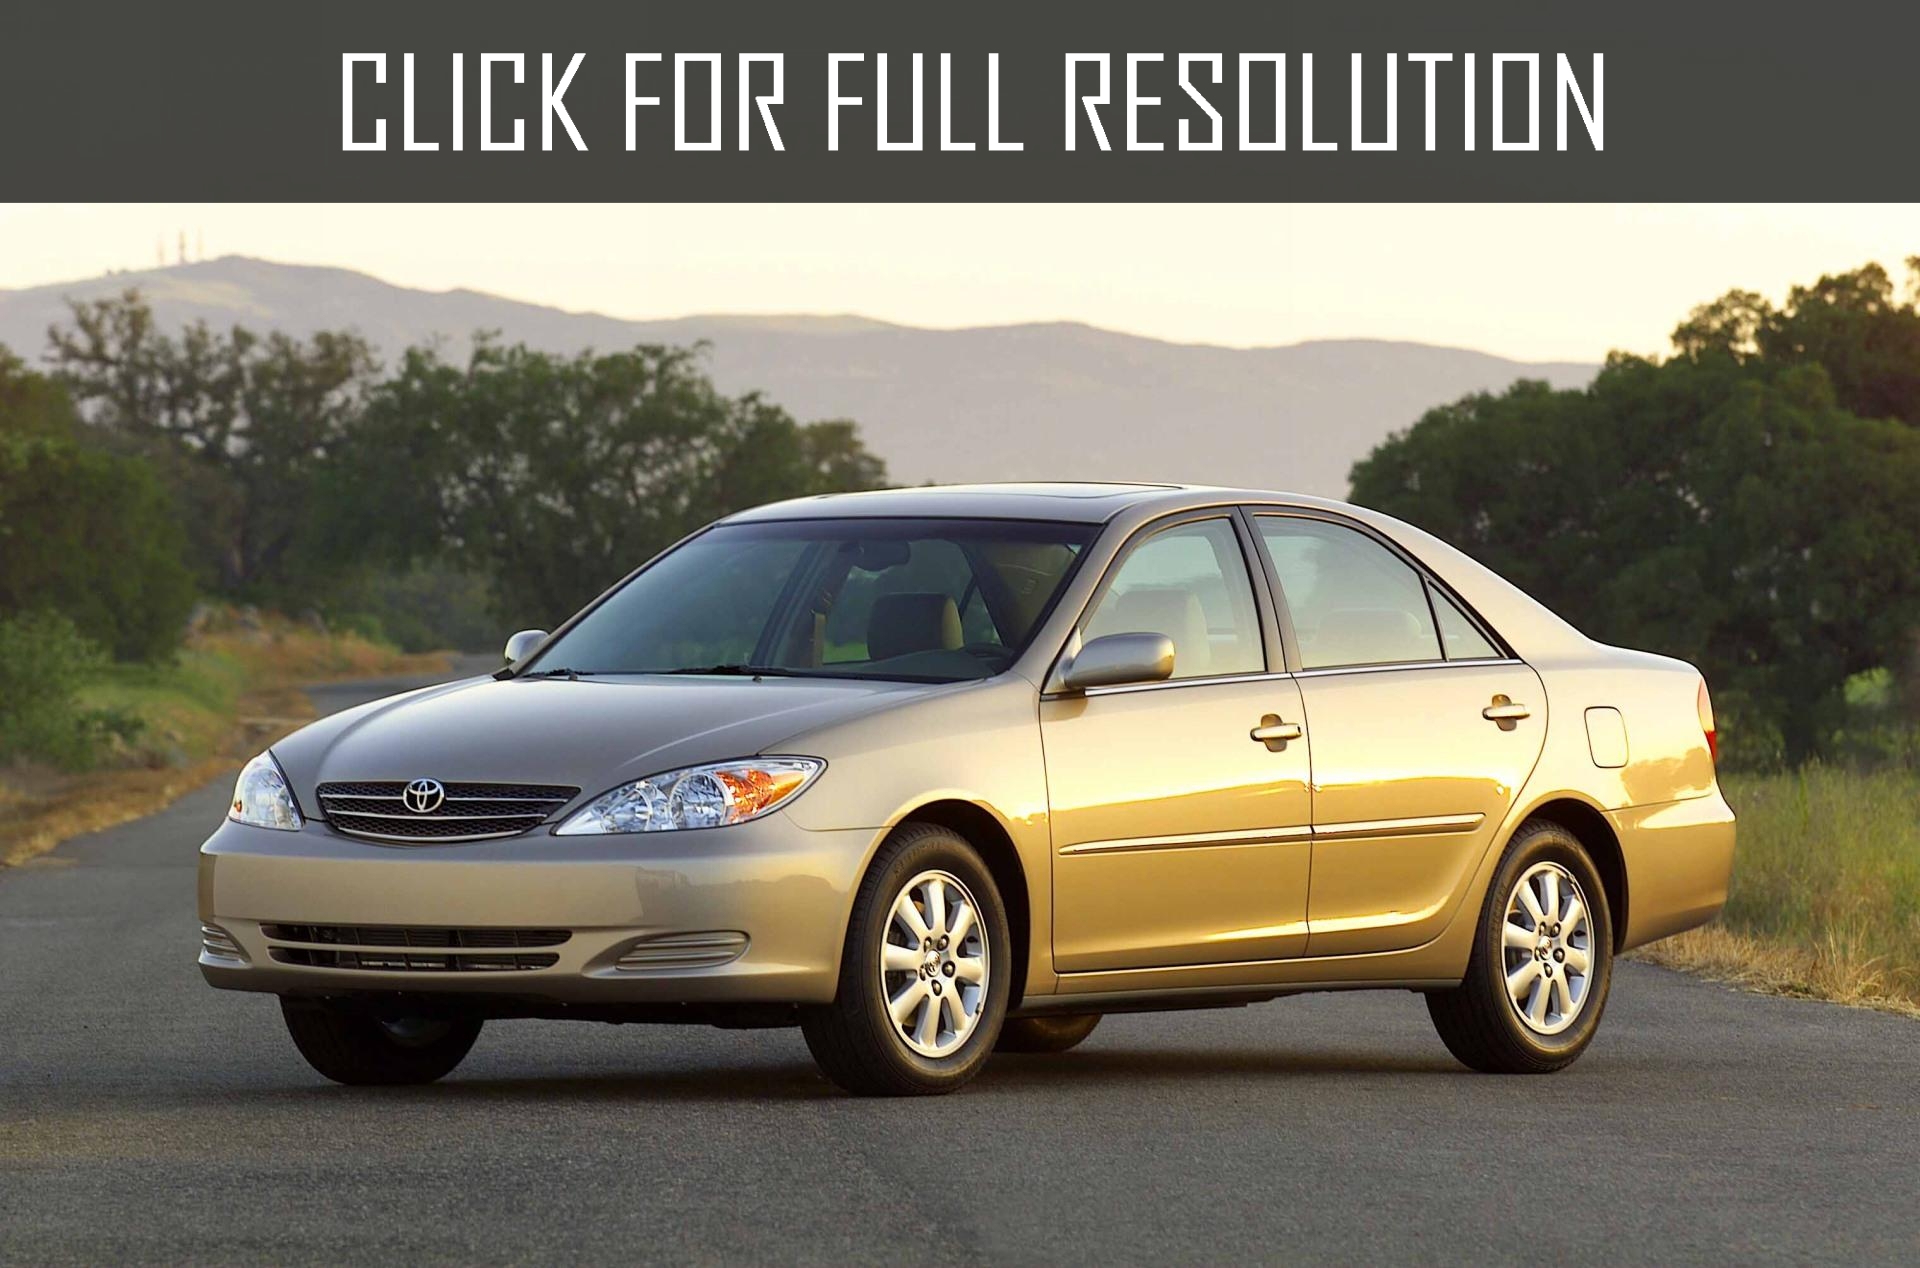 2003 Toyota Camry news reviews msrp ratings with amazing images